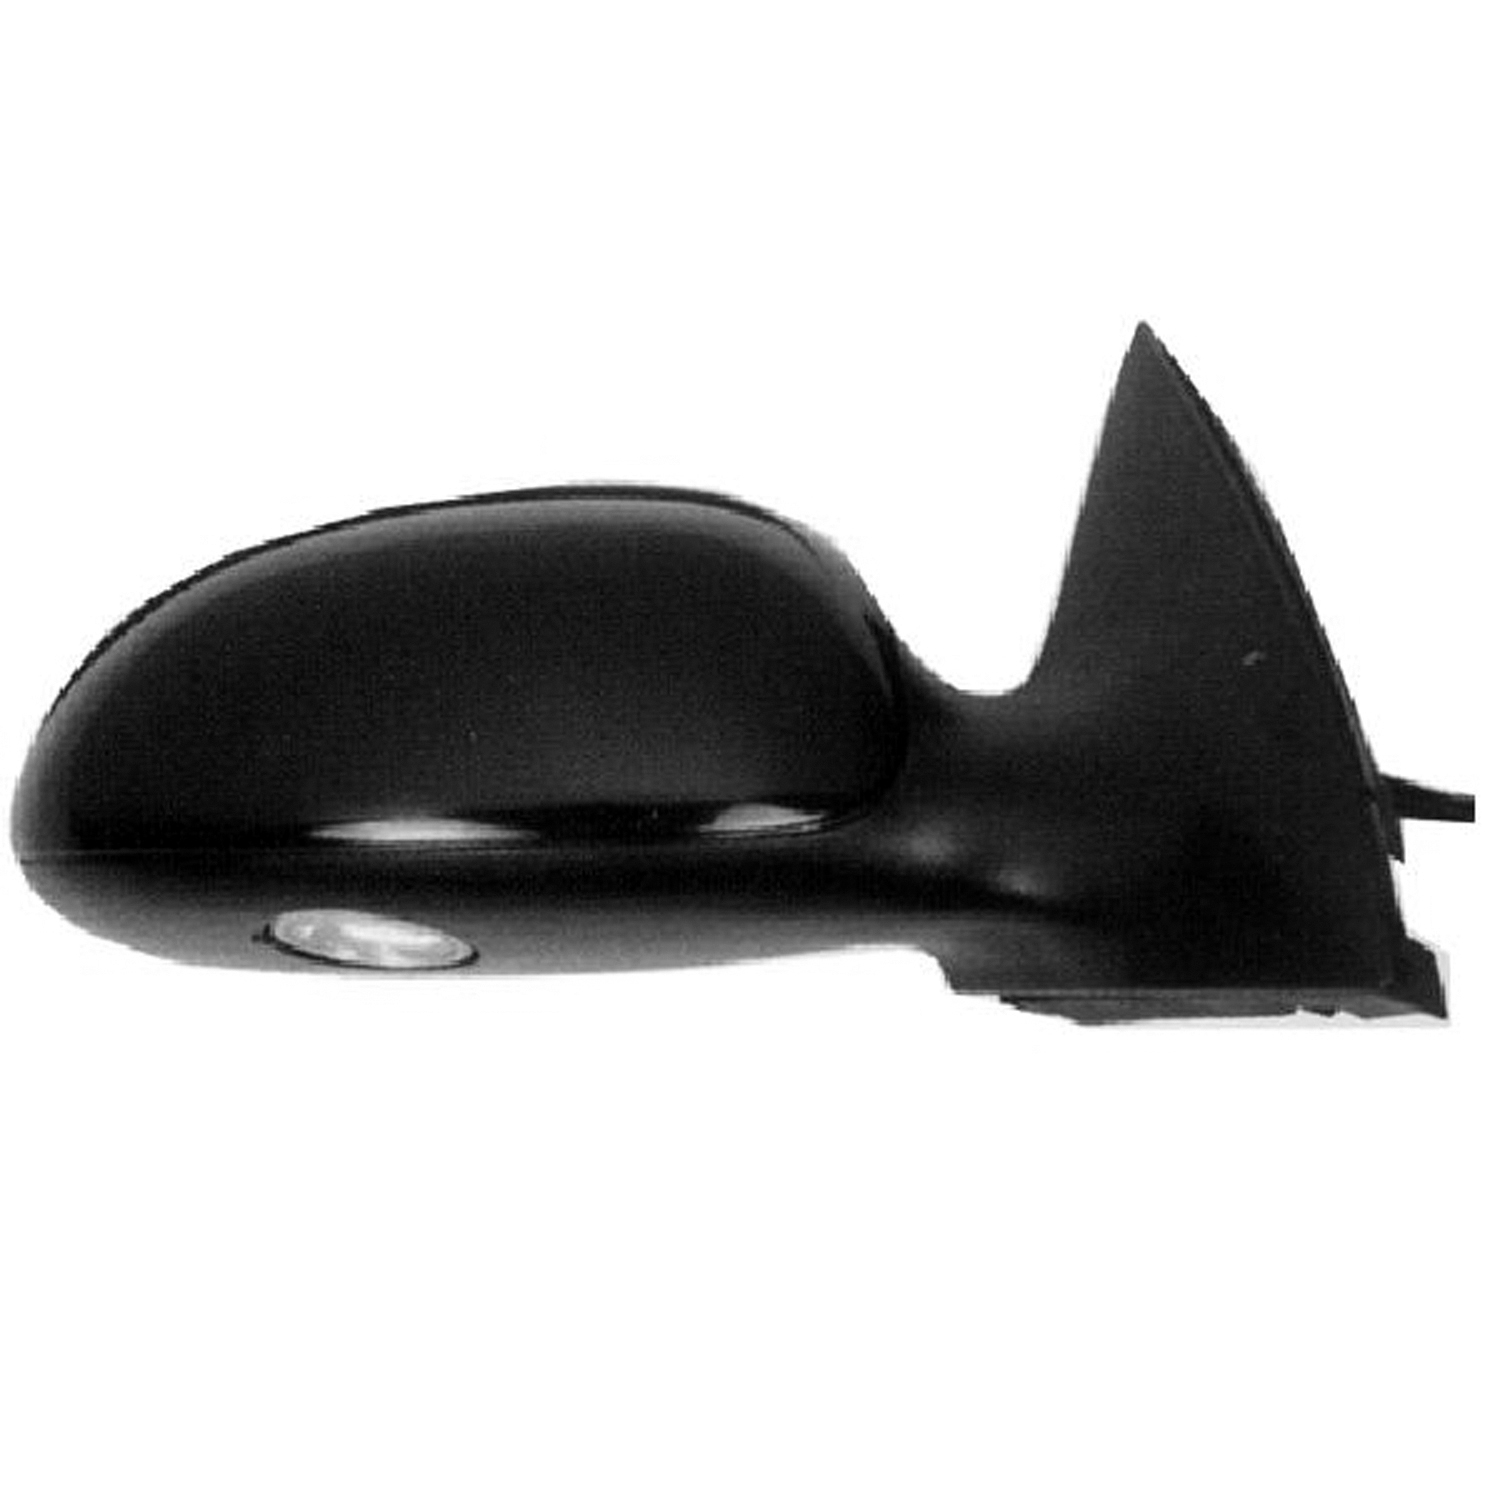 GetAllParts Aftermarket 2002-2005 Mercury Sable  Passenger Side Right Non-Heated Puddle Lamp Non-Folding Power Door Mirror